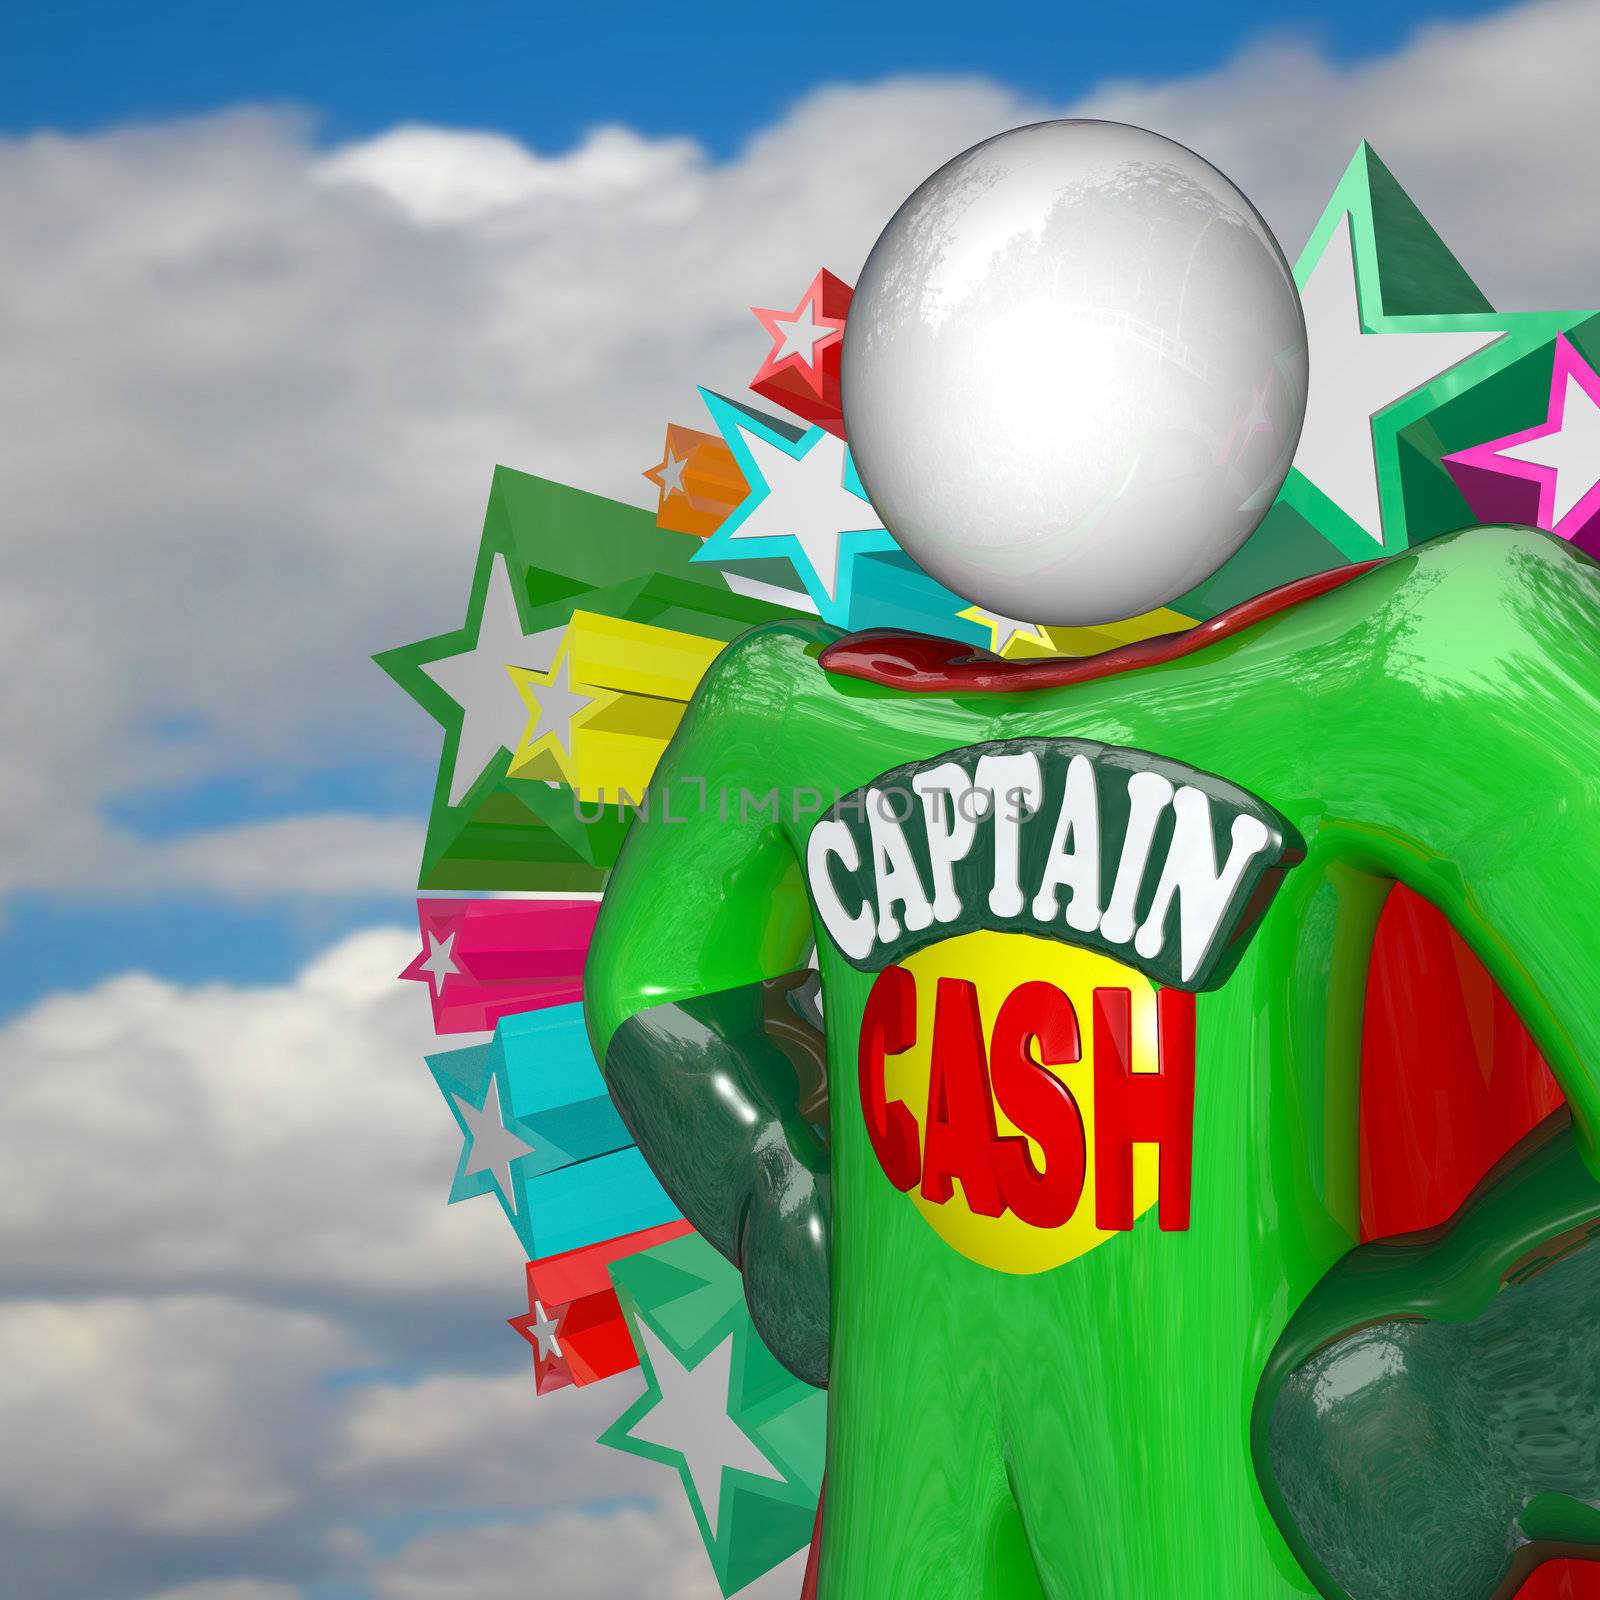 The superhero Captain Cash stands with arms on his hips with cape behind him against a blue cloudy sky, fighting for lower prices and rates to save you money